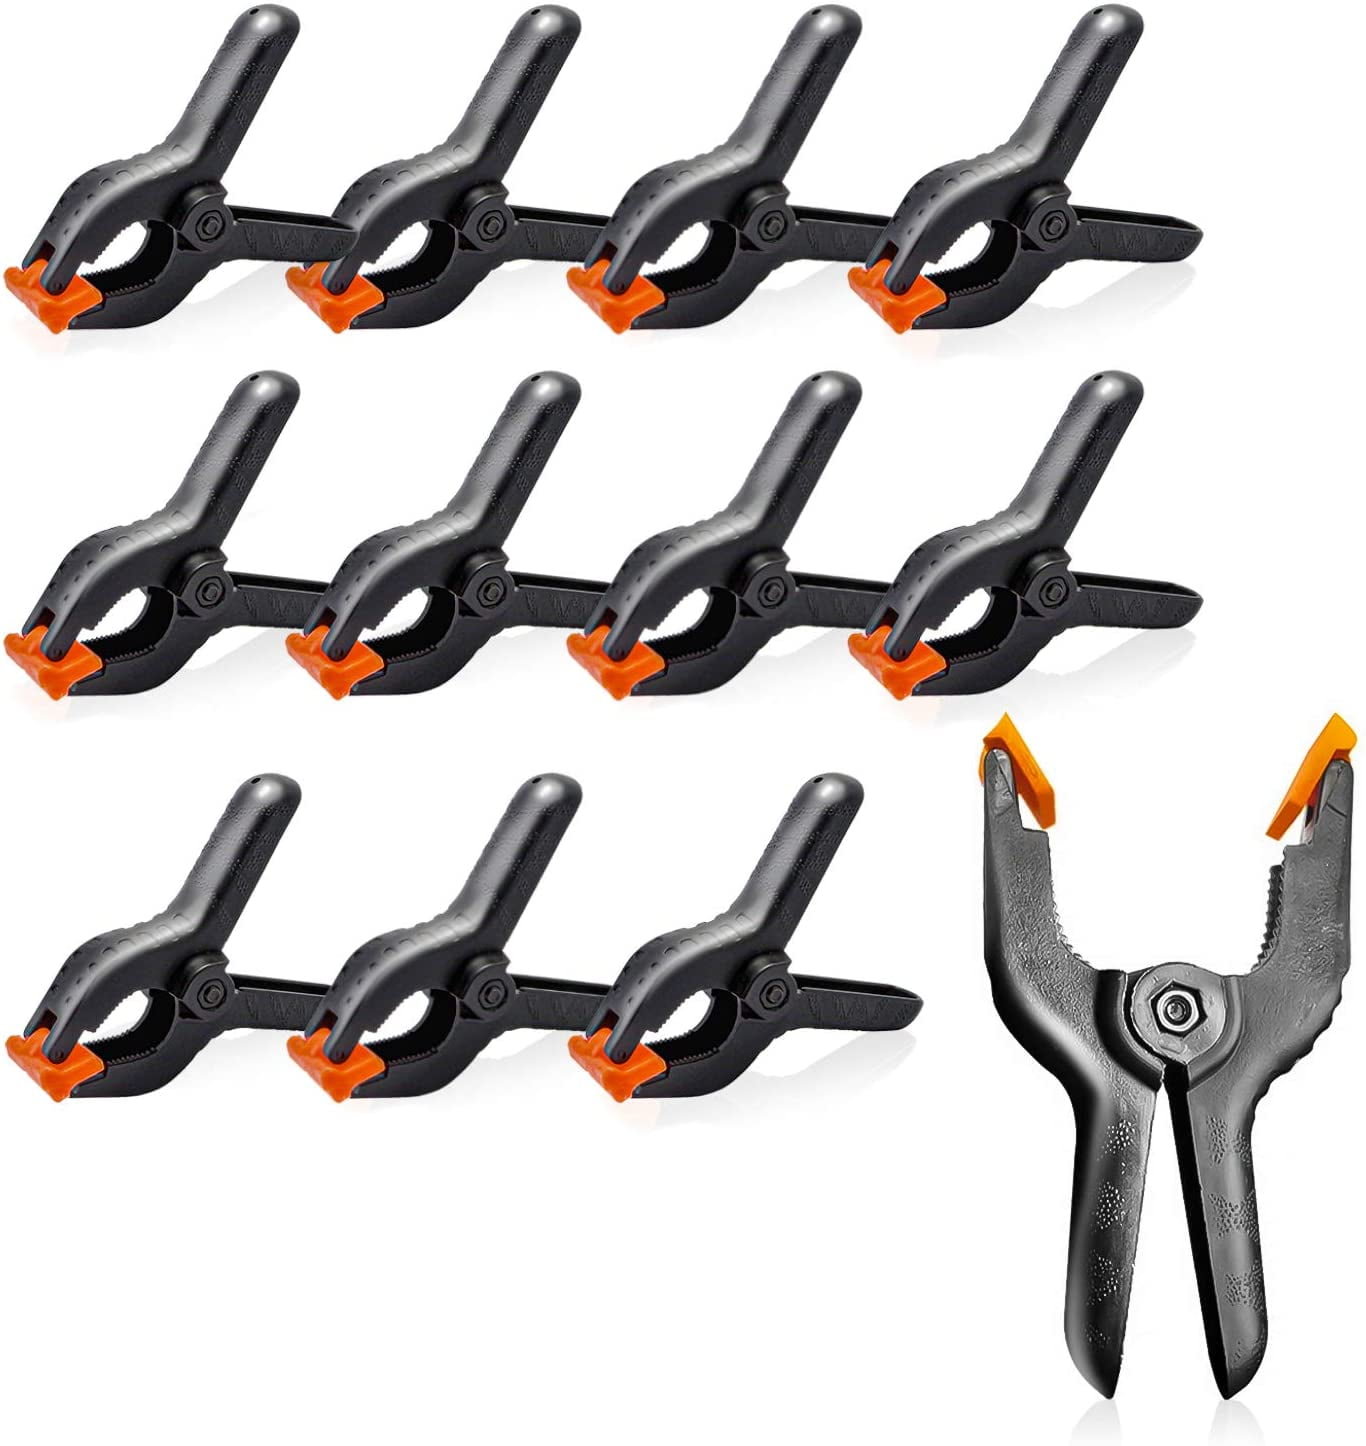 6pcs Plastic Nylon Toggle Clamp Spring Clamps Photo Clip Tips Tool 2" Practical 